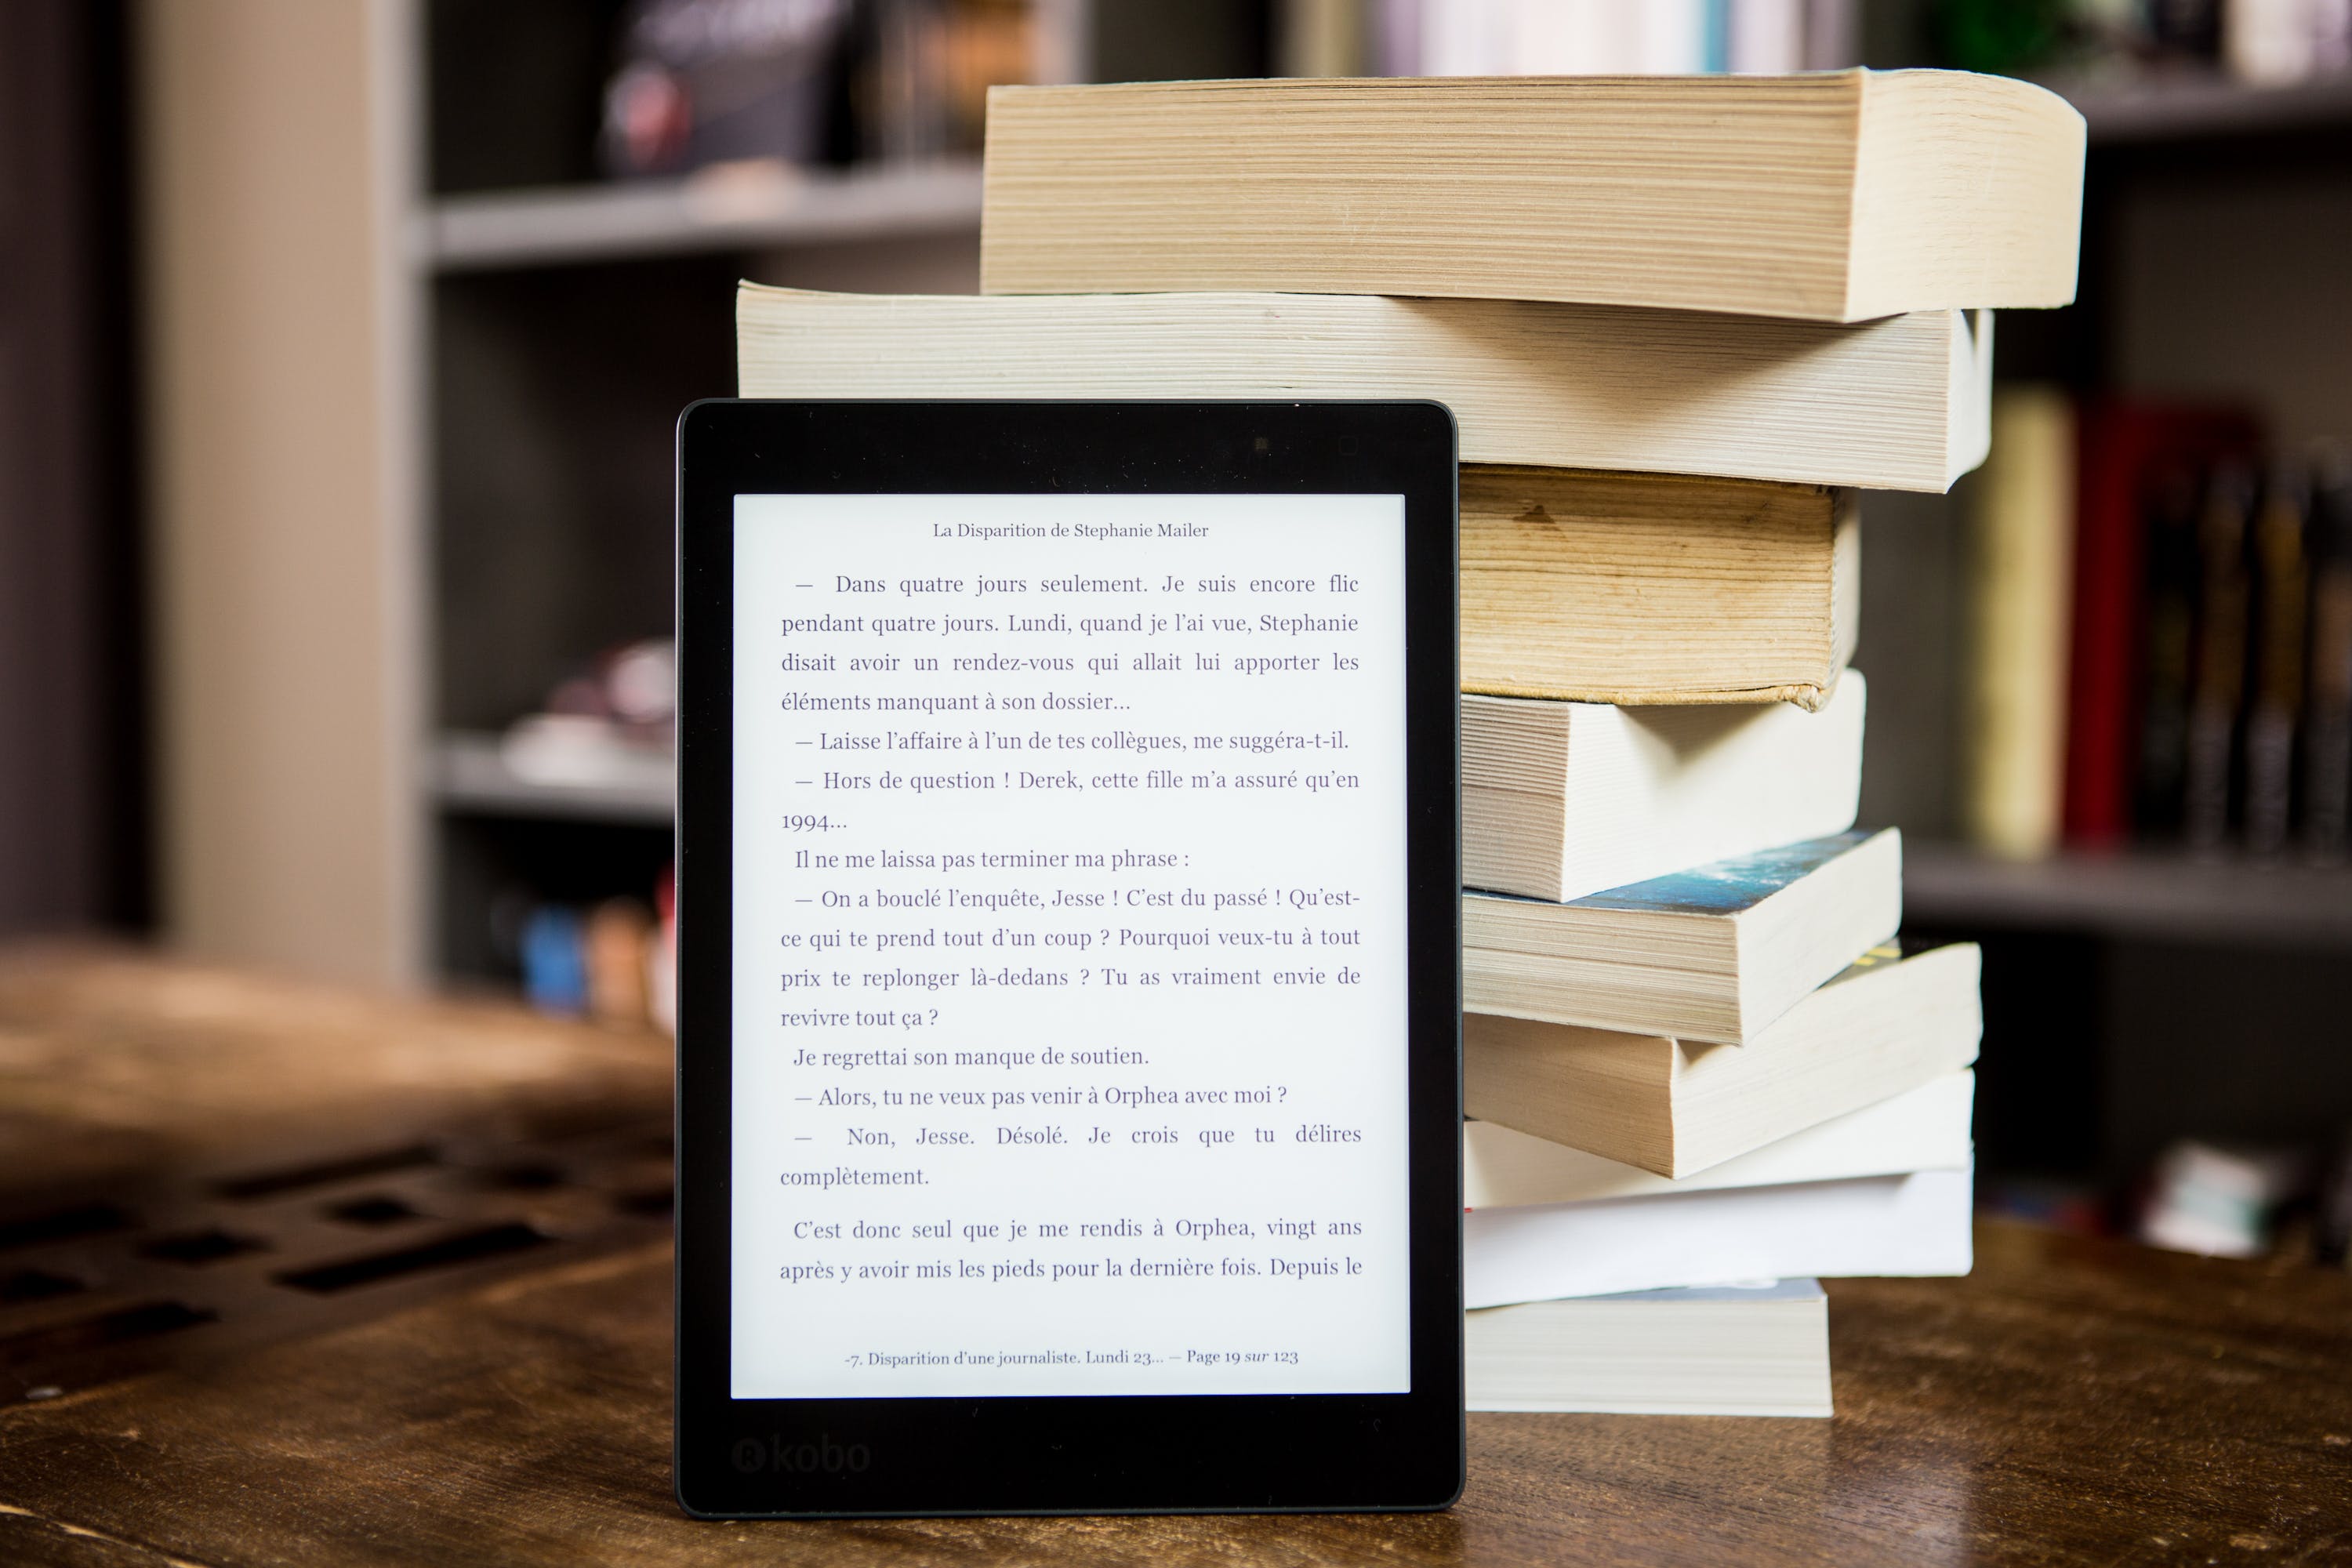 Image of an e-reader leaning against a stack of books on a table in a library.